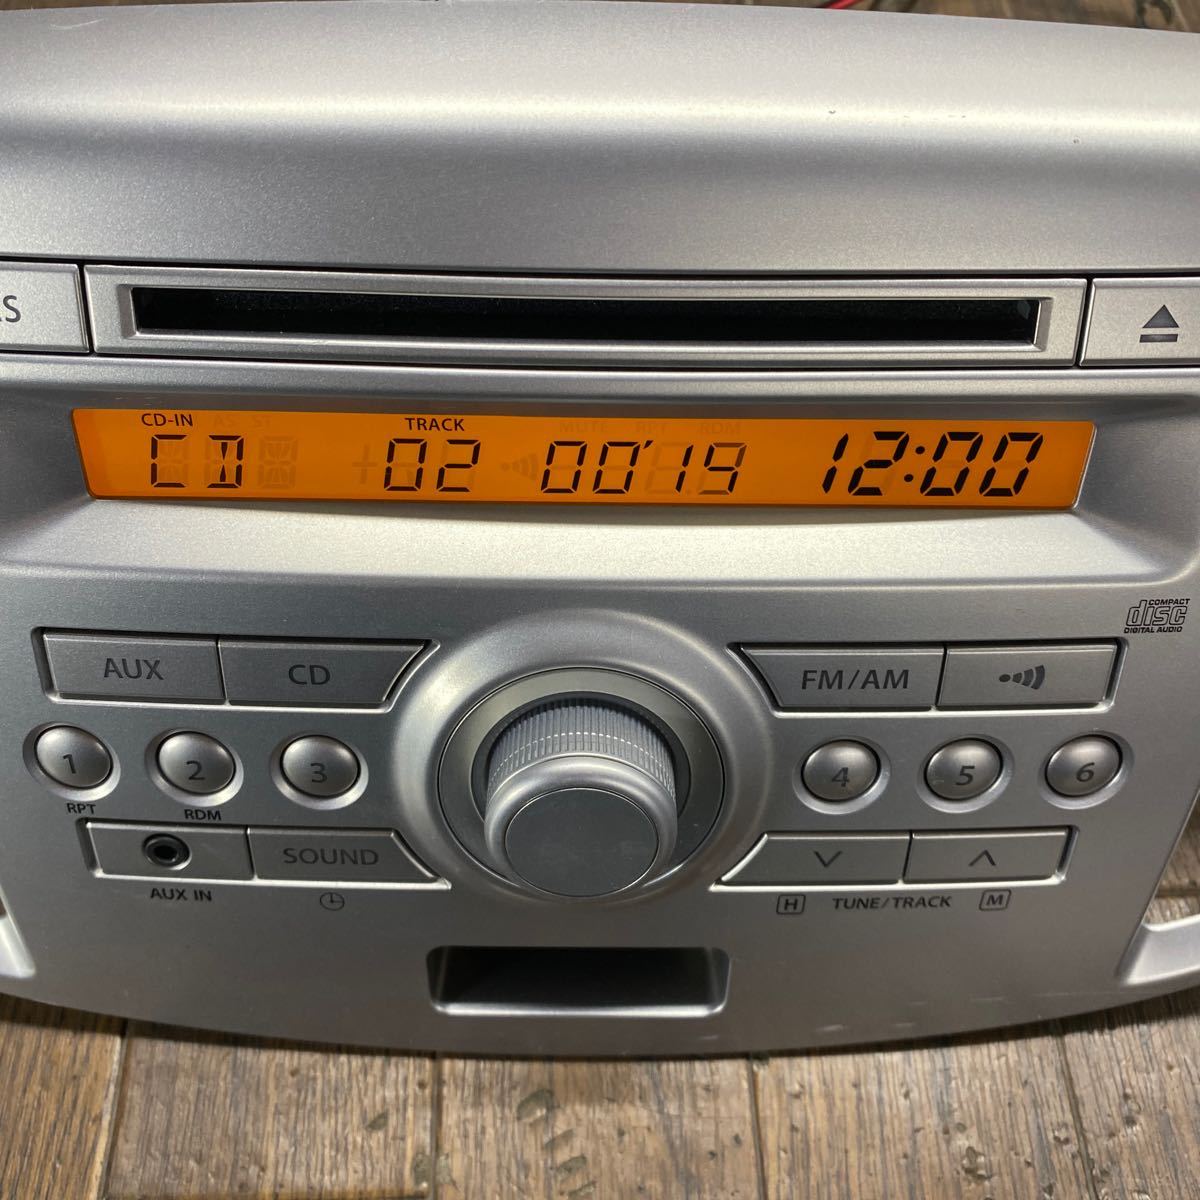 AV12-280 super-discount car stereo SUZUKI clarion PS-3517 39101-72M00-ZML 0050121 CD AUX AM/FM verification for wiring use simple operation verification ending used present condition goods 